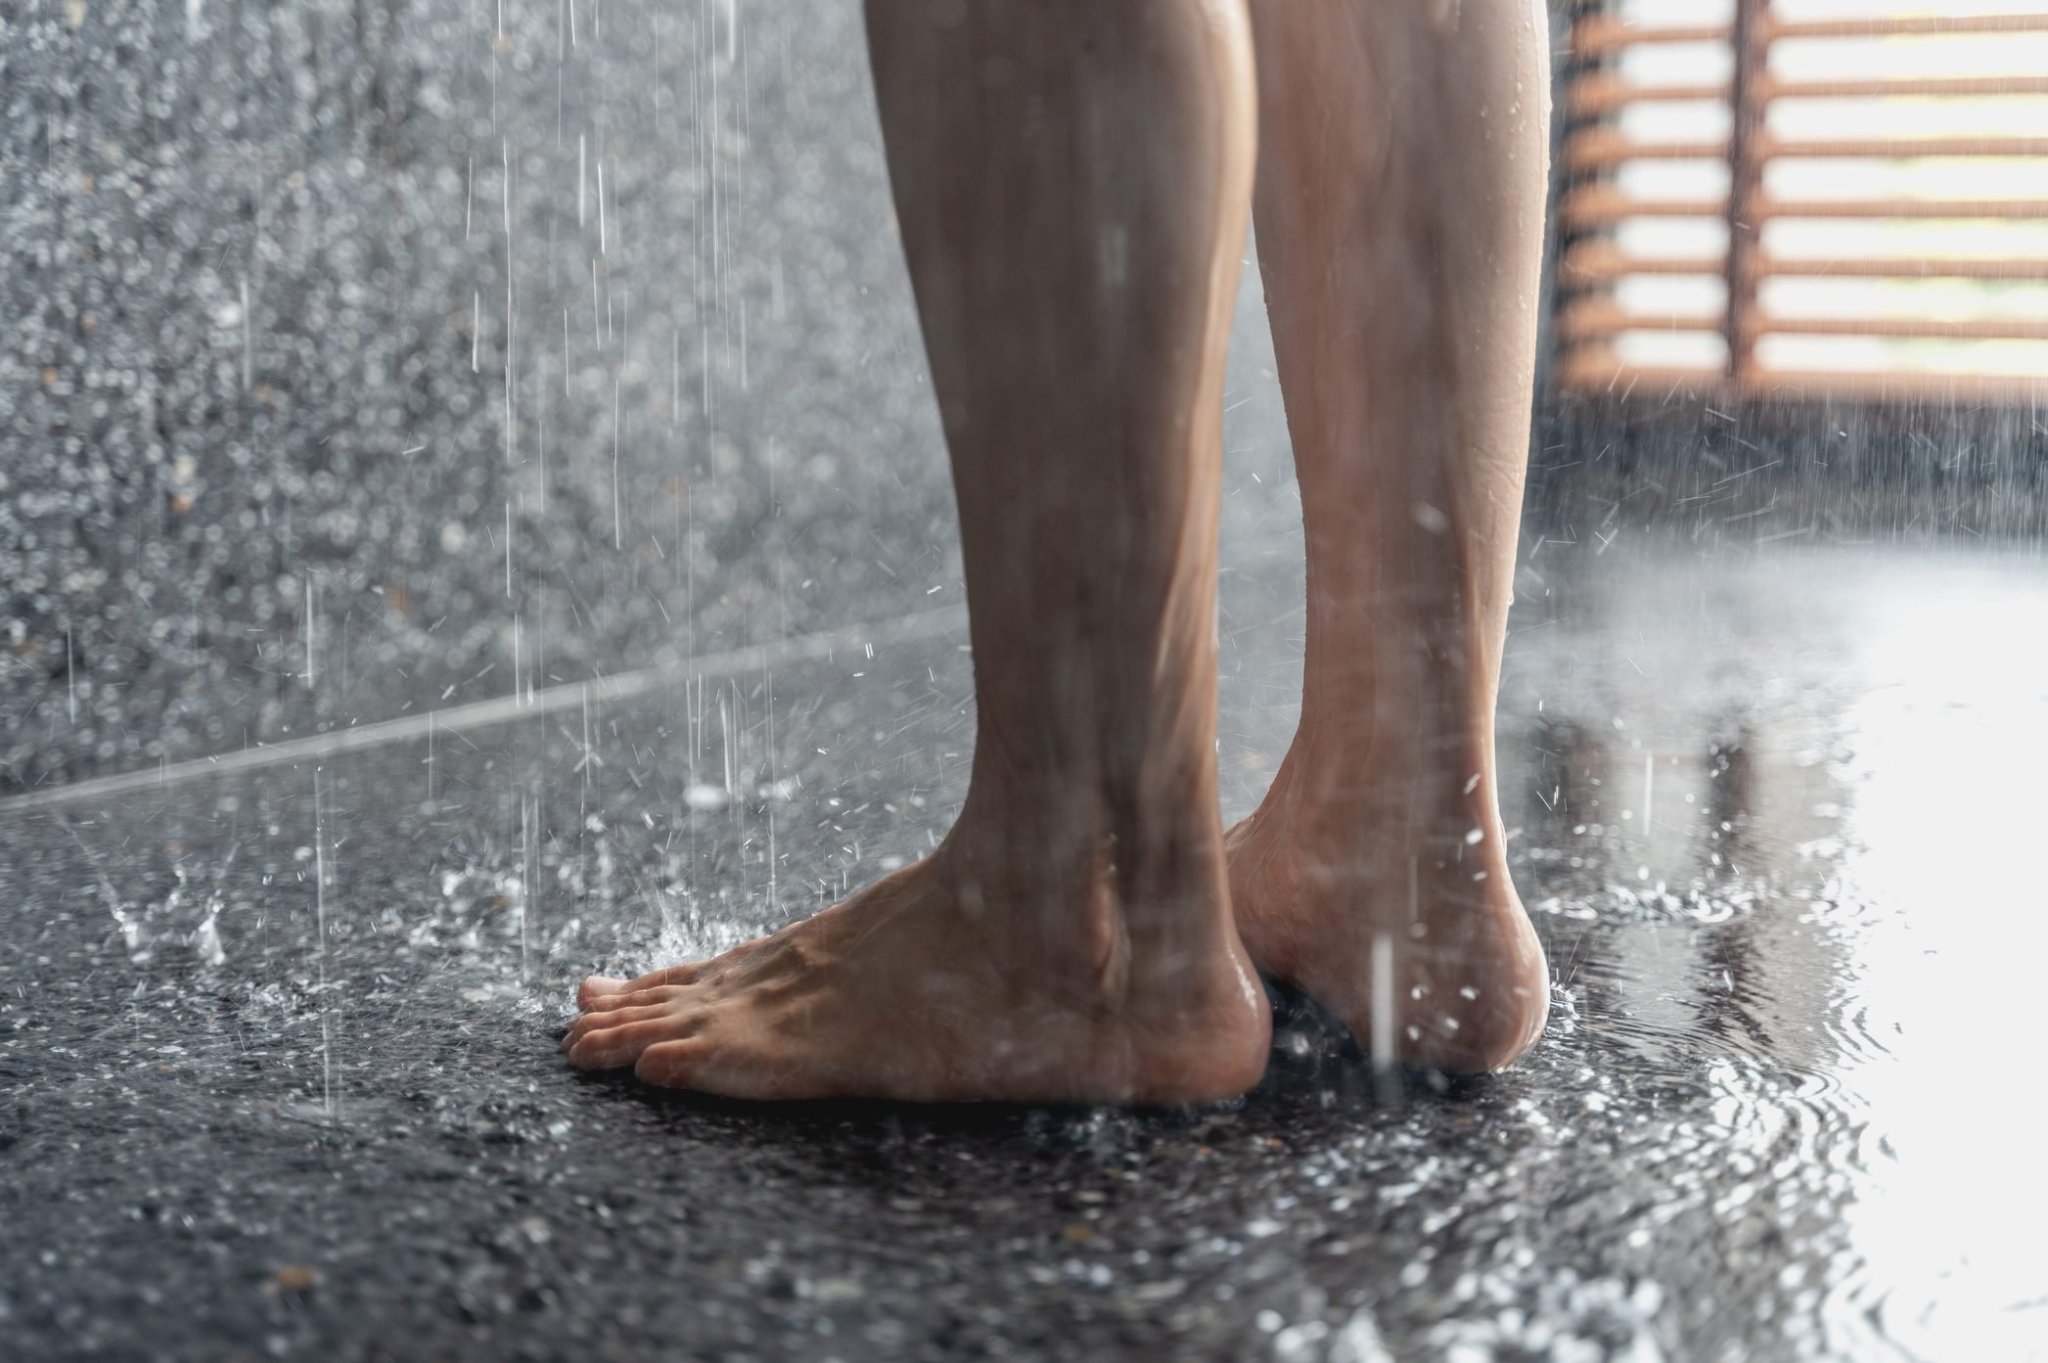 How Bad Is It to Pee in the Shower?